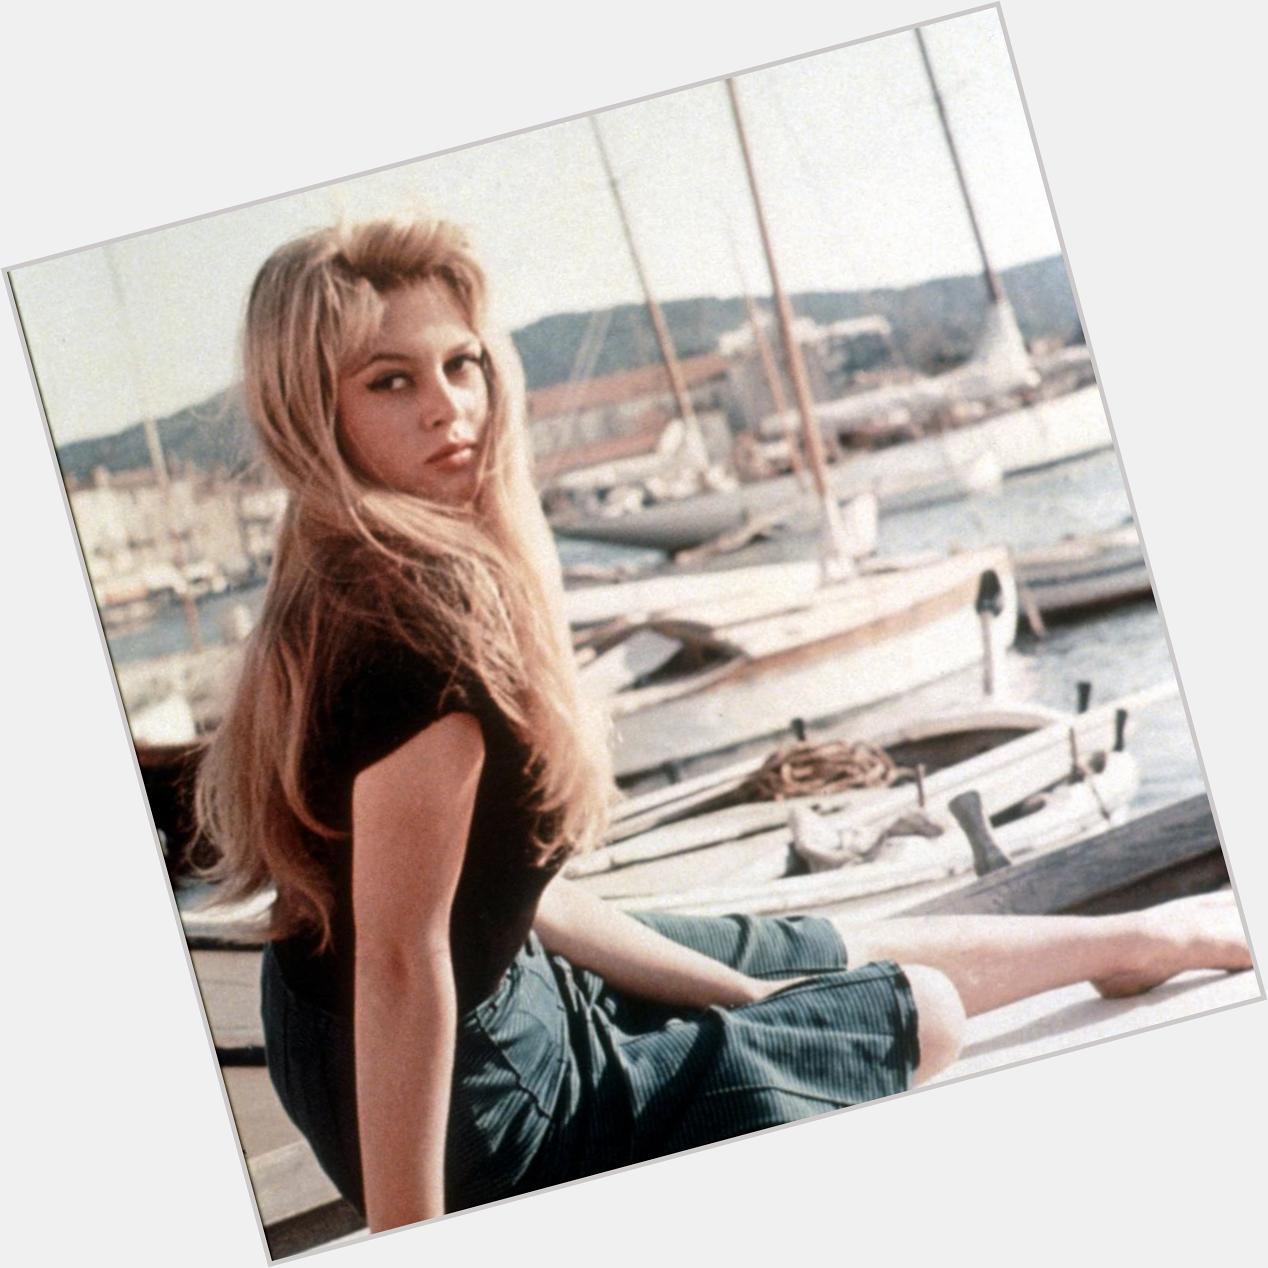 Join us in wishing the dazzling Brigitte Bardot a very happy birthday today! 